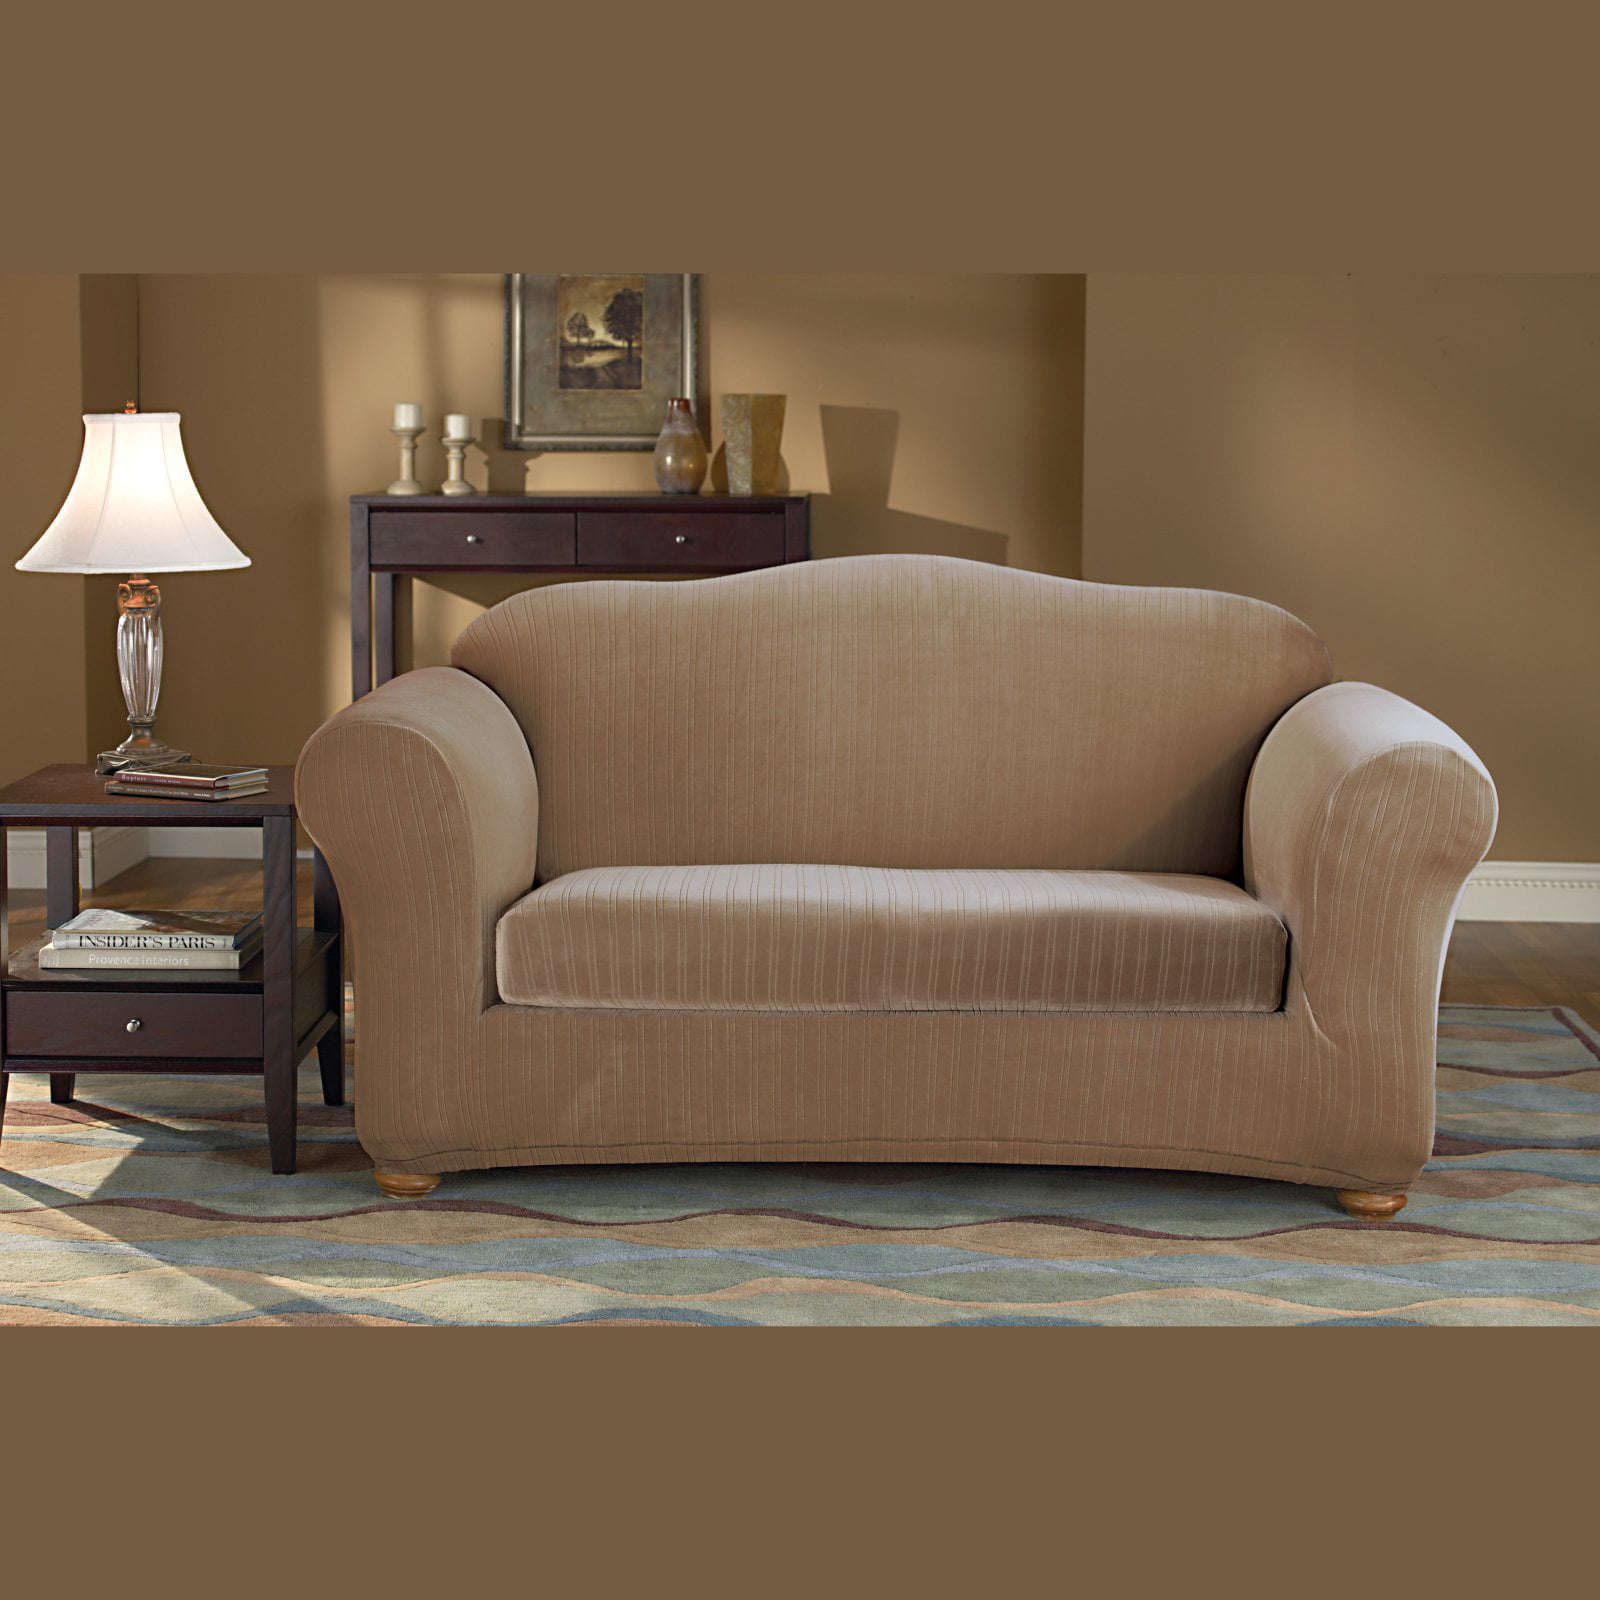 Sofa Slipcover Sure Fit Stretch Stripe One Piece Brown Box Cushion Seat Style 